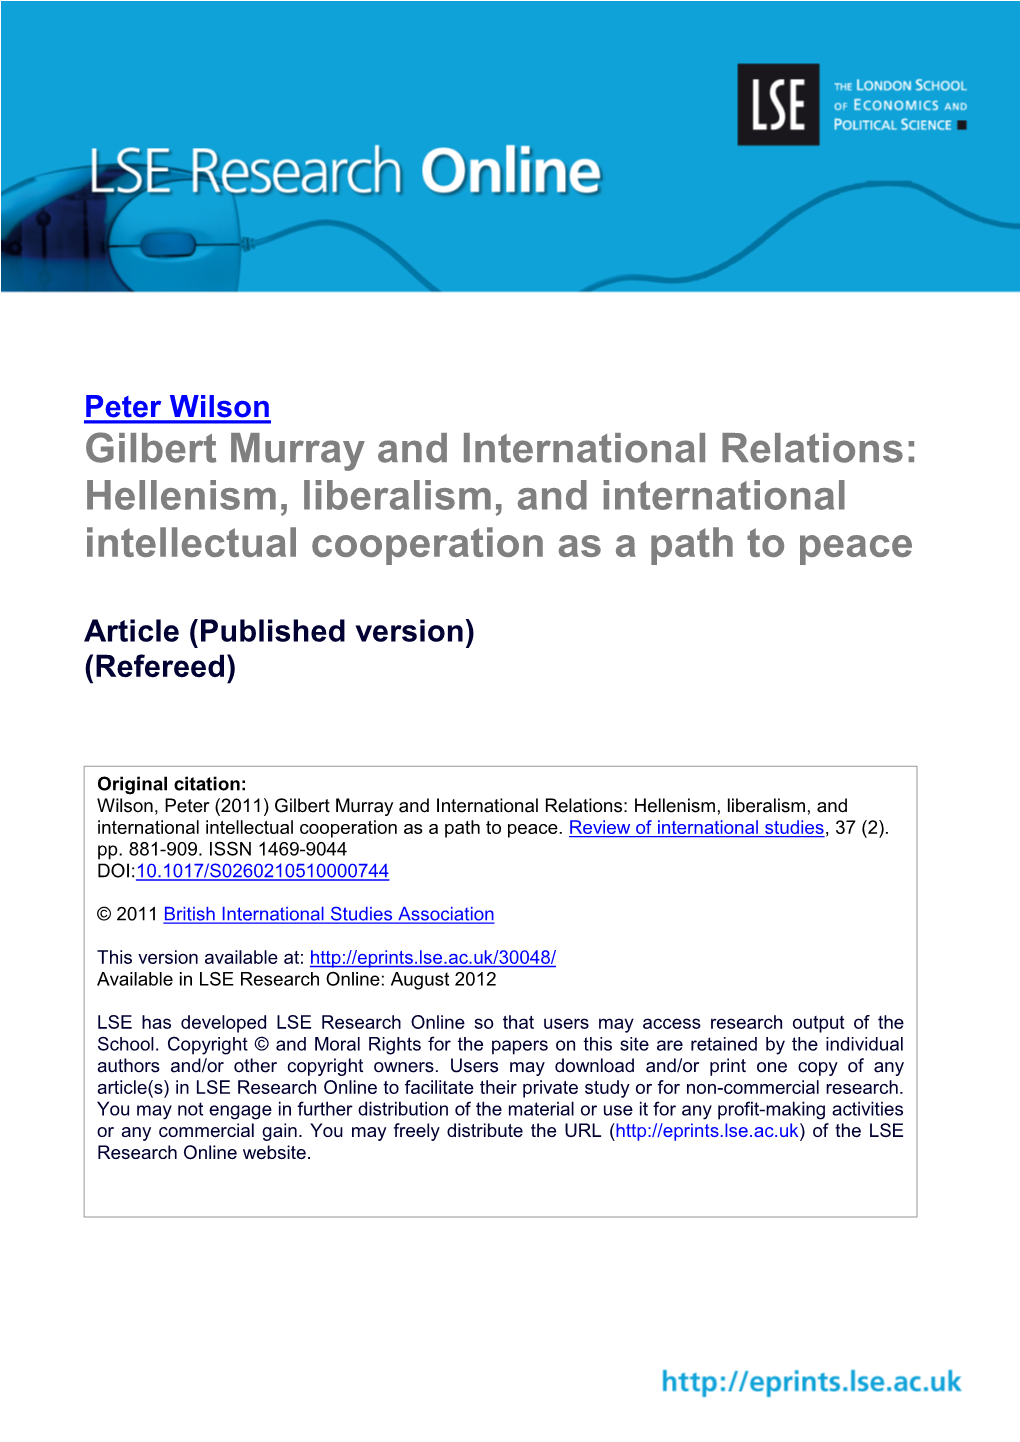 Gilbert Murray and International Relations: Hellenism, Liberalism, and International Intellectual Cooperation As a Path to Peace